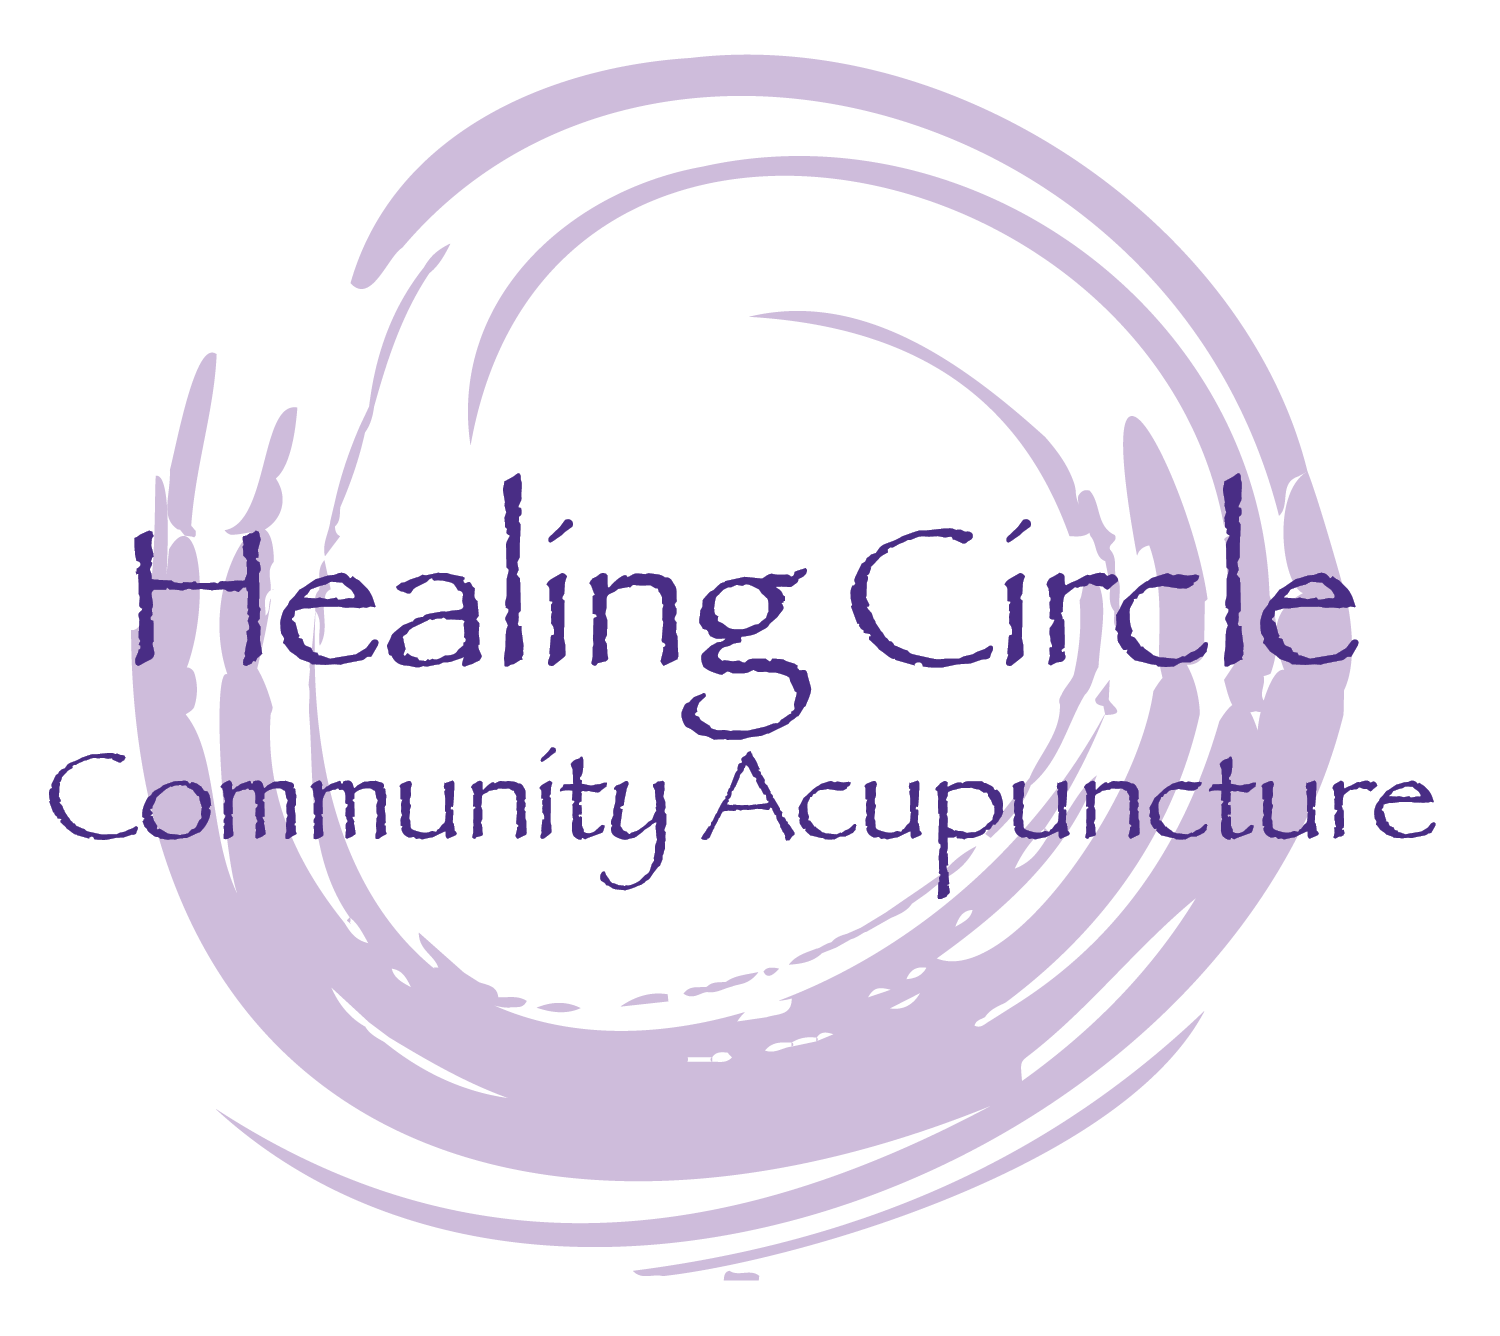 Healing Circle Community Acupuncture